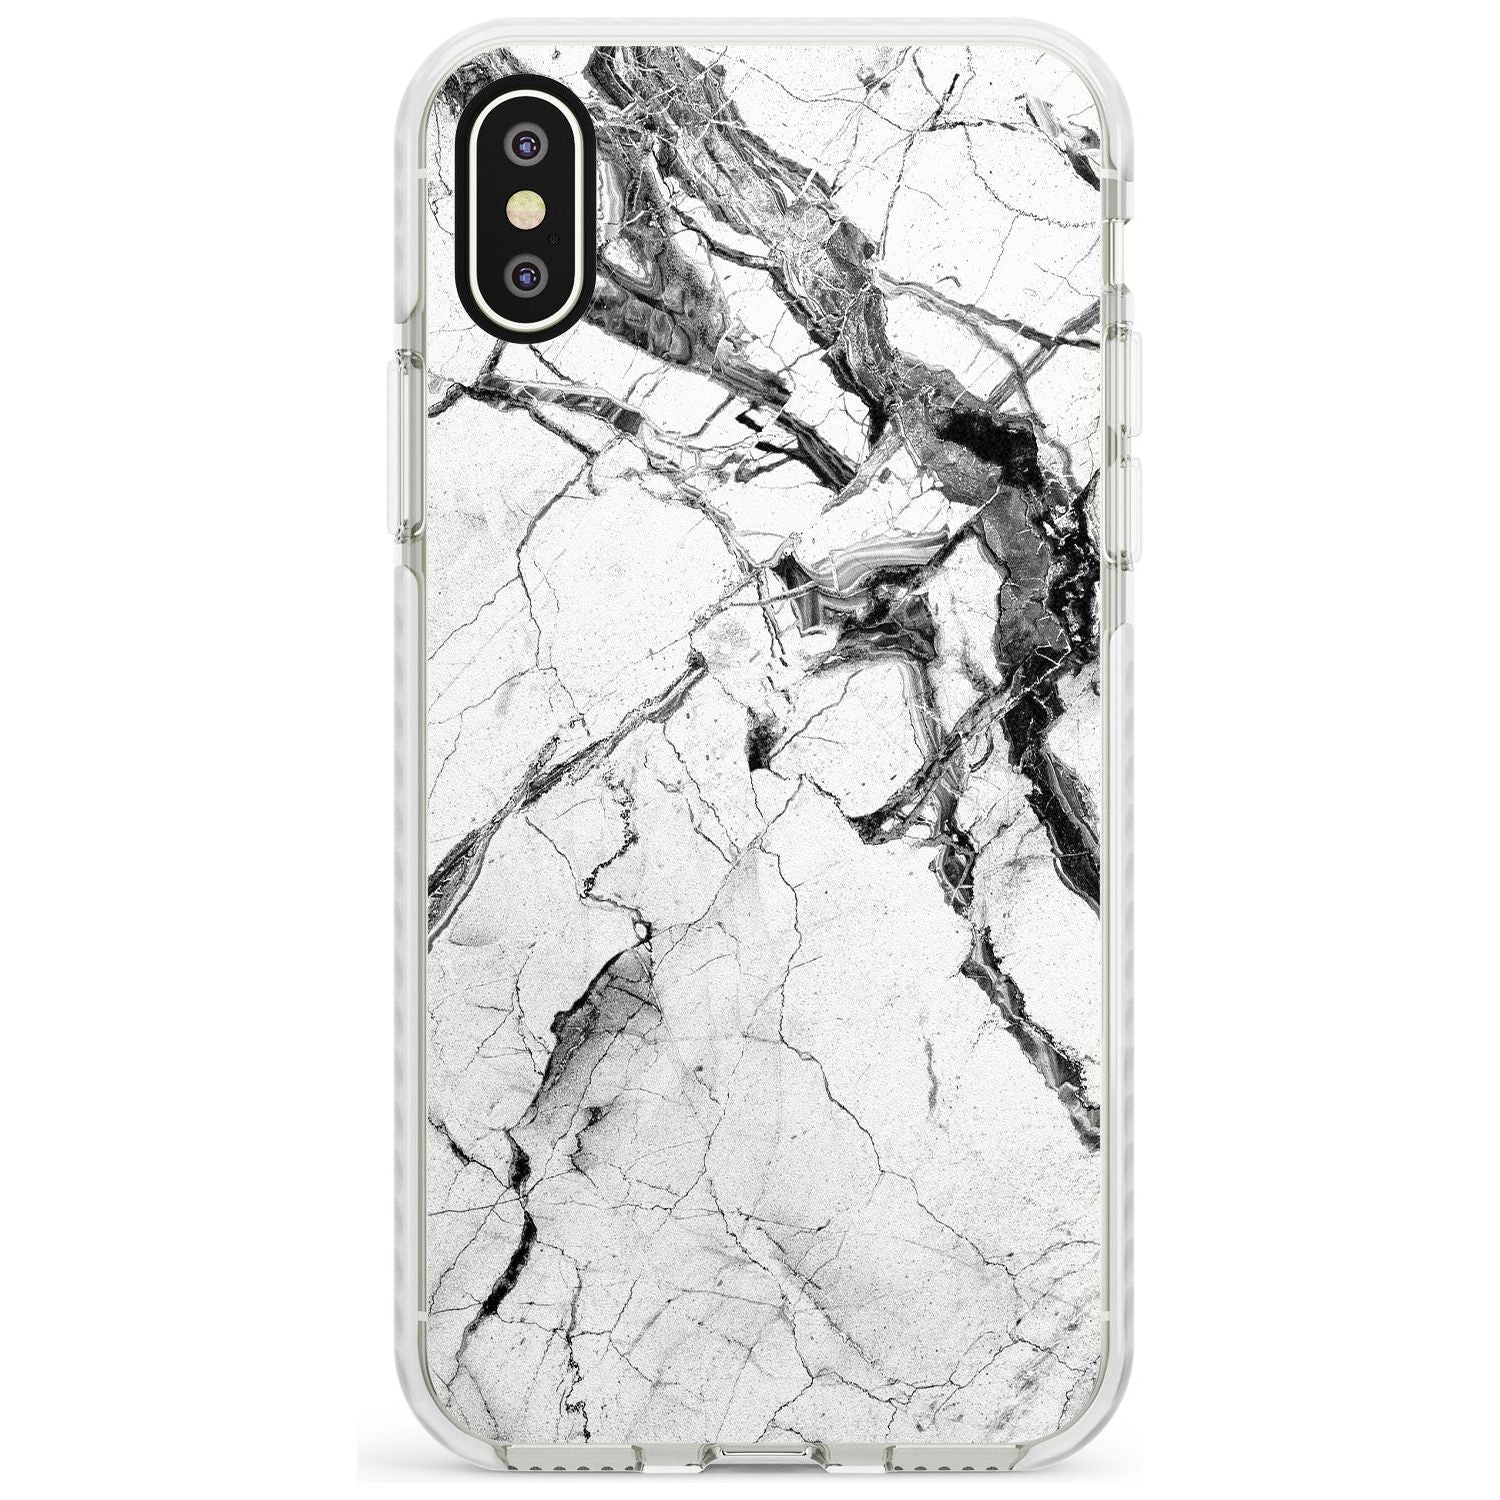 Black & White Stormy Marble Impact Phone Case for iPhone X XS Max XR